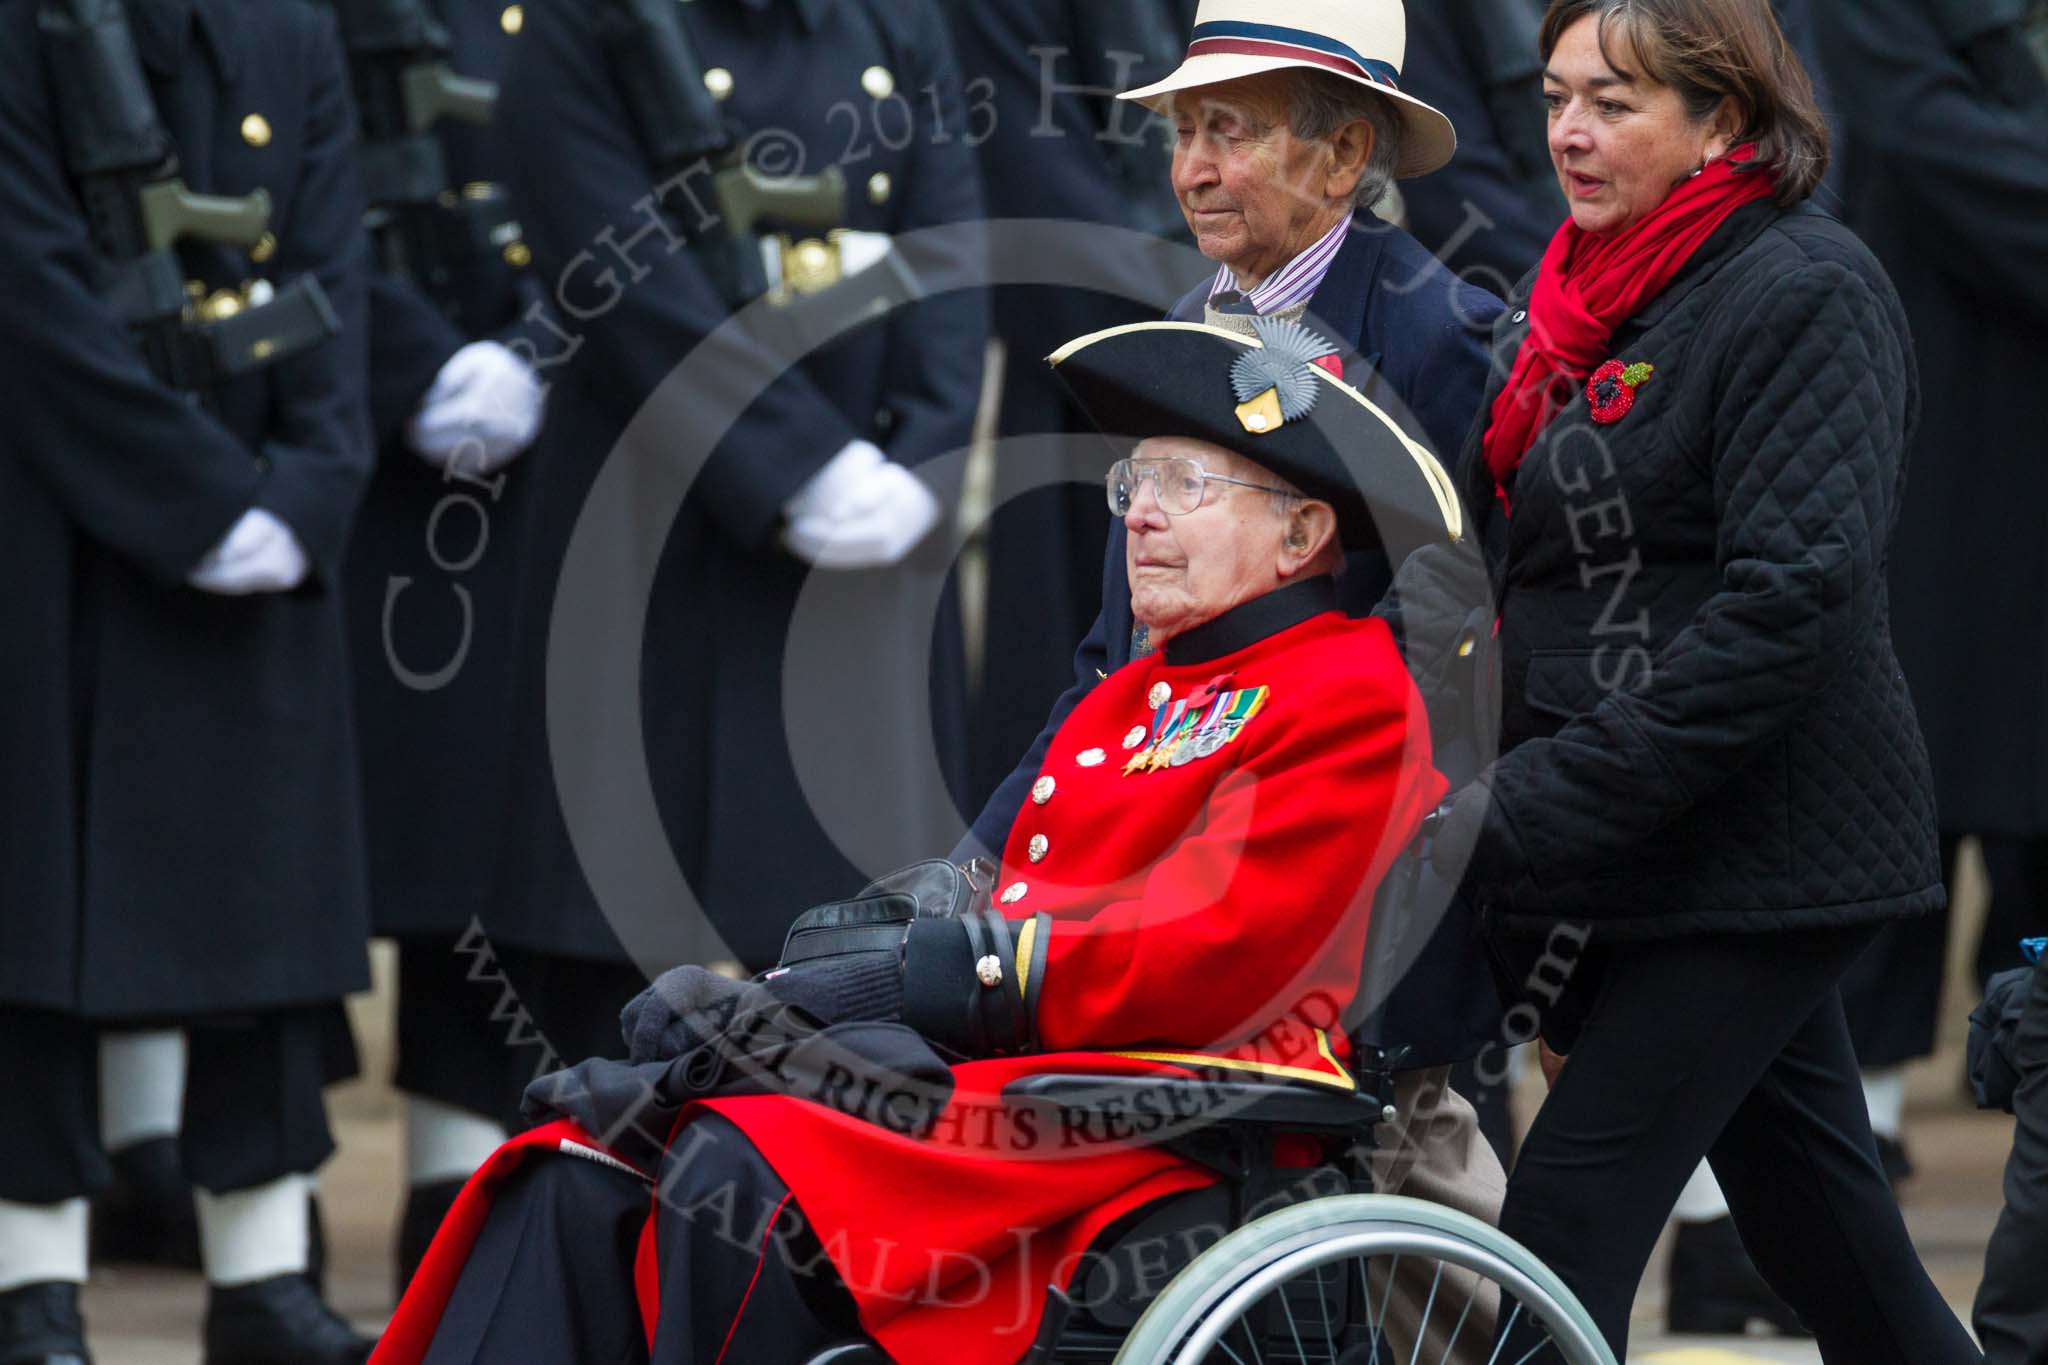 Remembrance Sunday at the Cenotaph 2015: Group F2, Far East Prisoners of War.
Cenotaph, Whitehall, London SW1,
London,
Greater London,
United Kingdom,
on 08 November 2015 at 12:04, image #1010